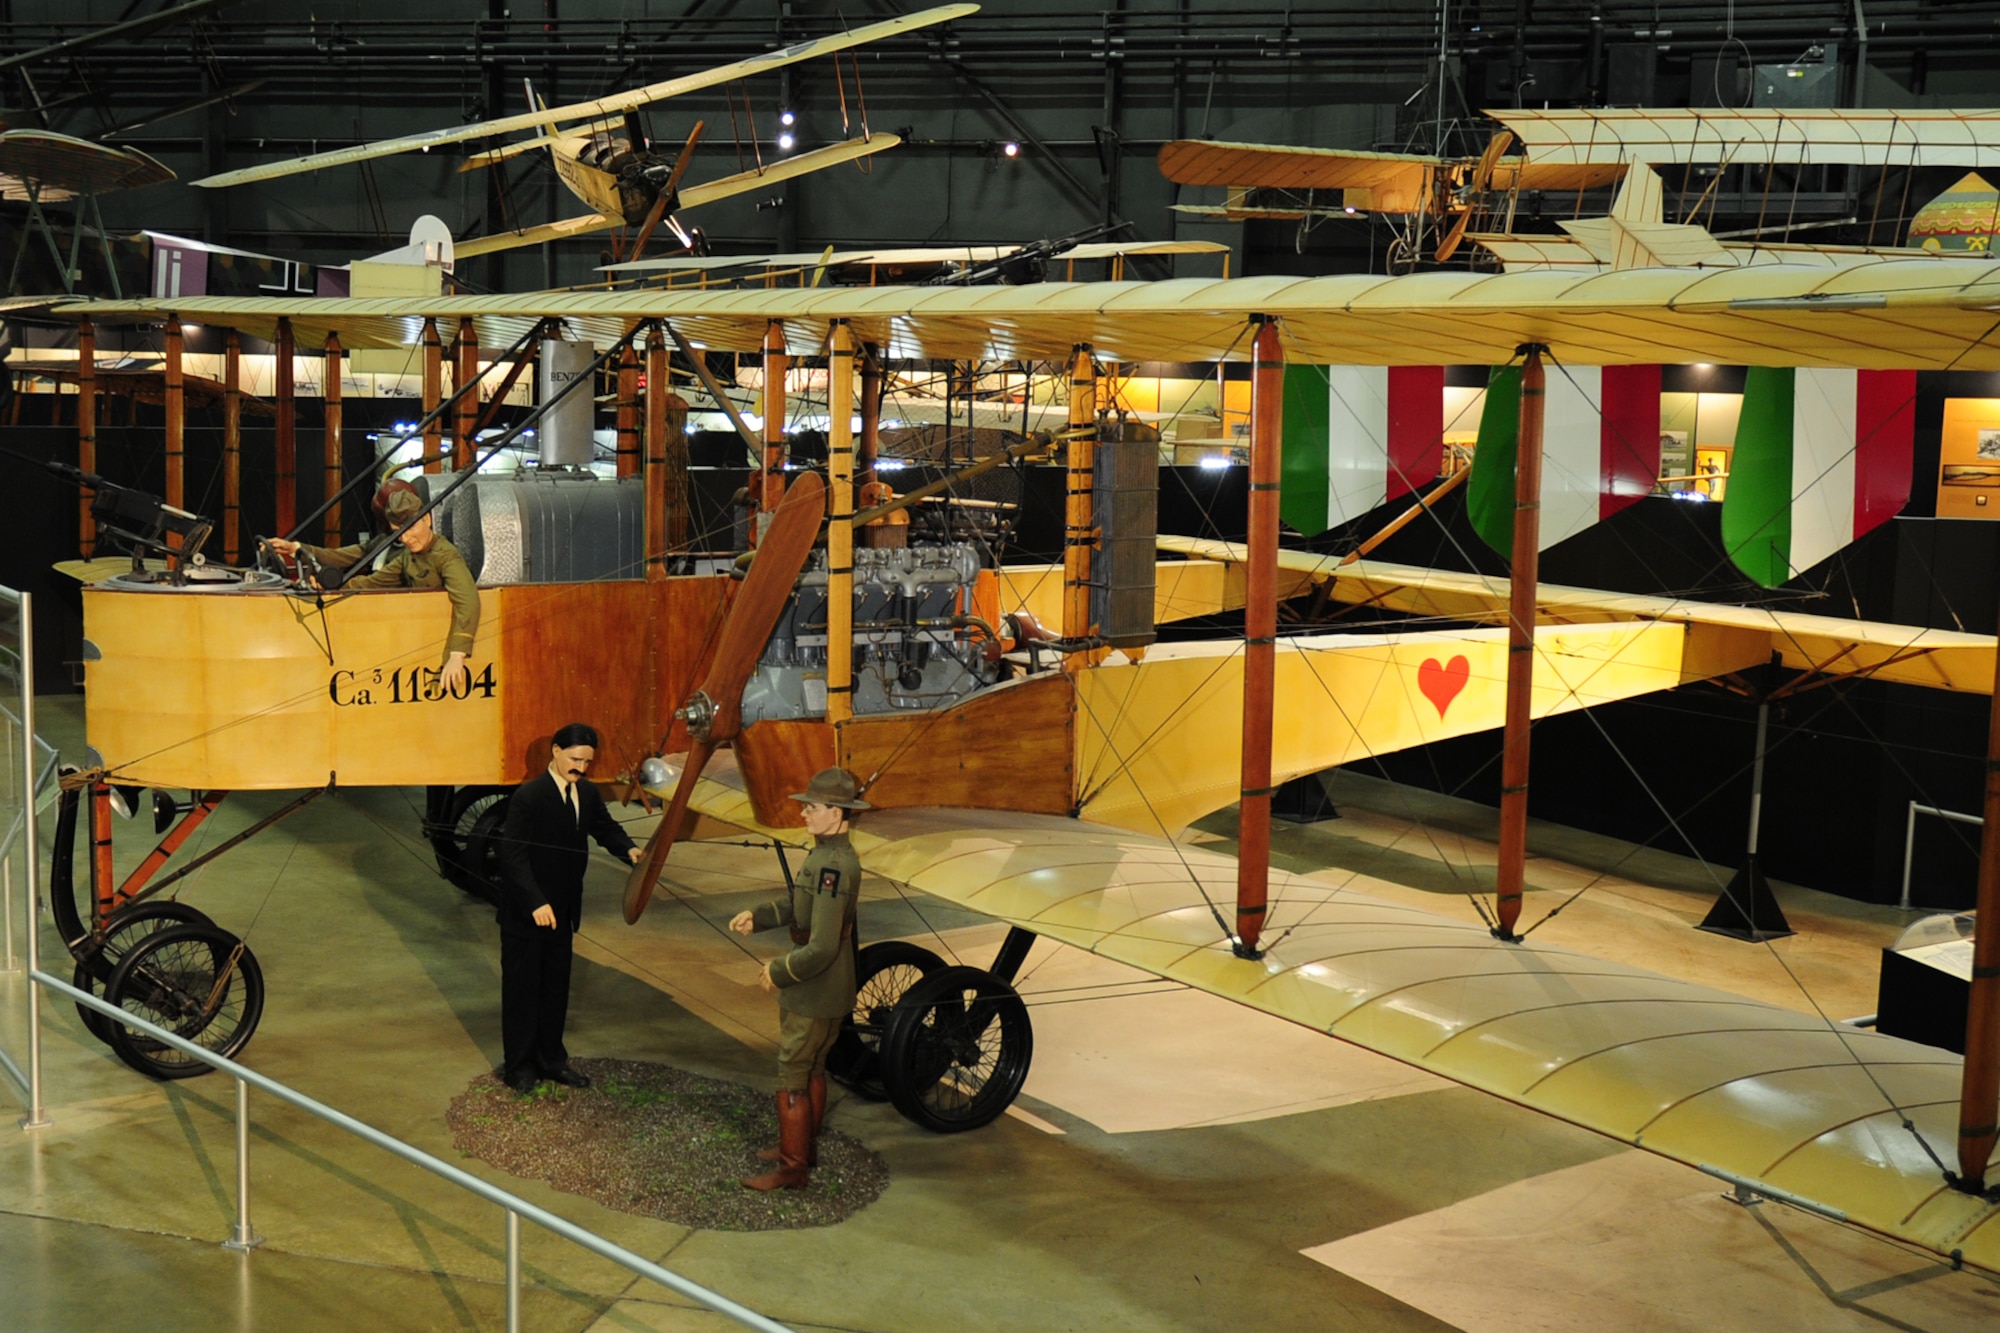 DAYTON, Ohio -- Caproni Ca. 36 in the Early Years Gallery at the National Museum of the United States Air Force. (U.S. Air Force photo)